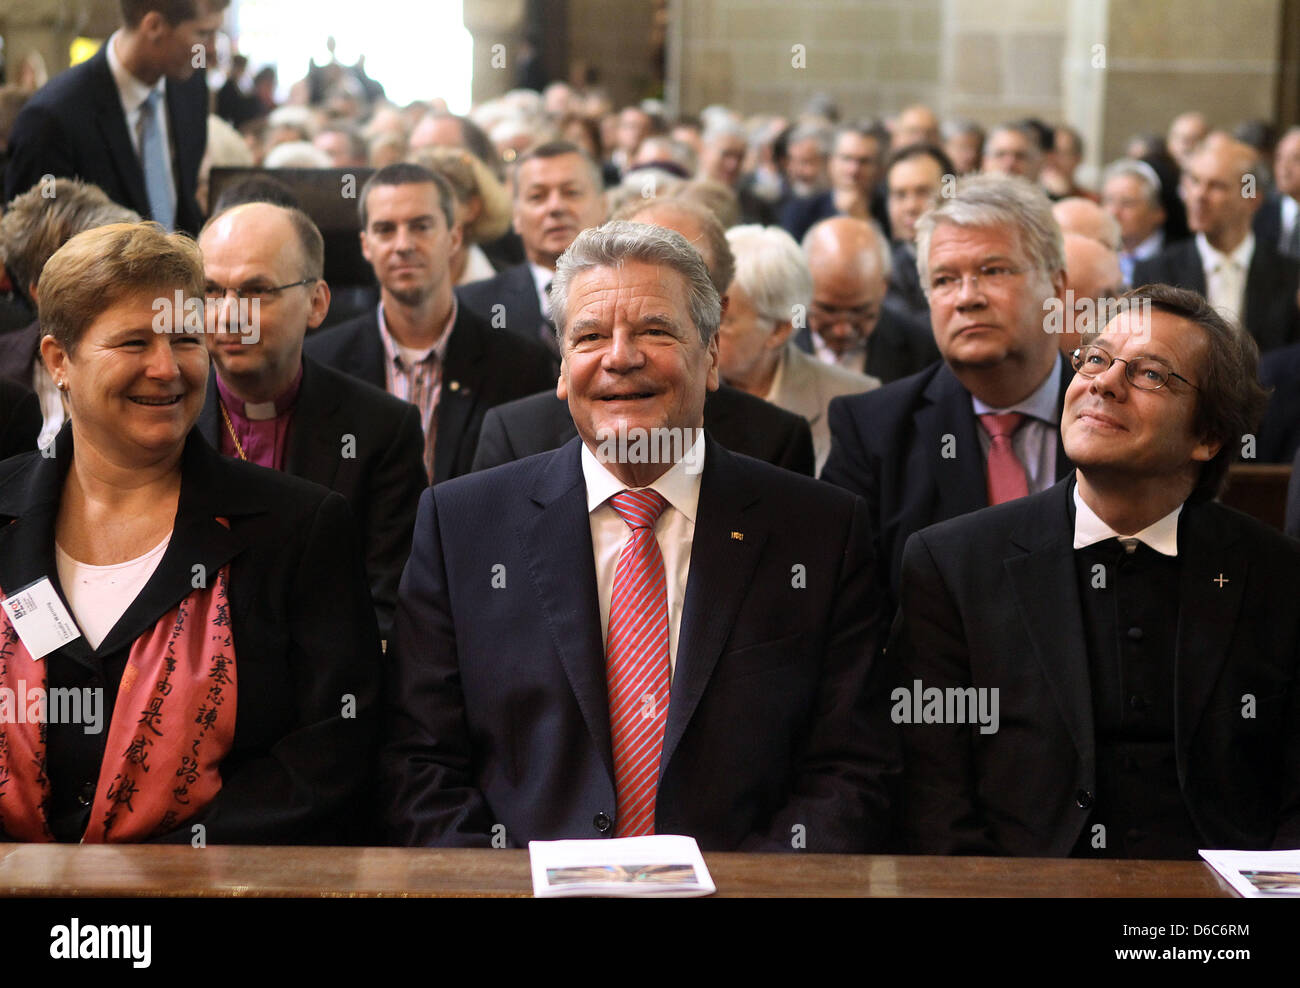 German President Joachim Gauck (C), member of the board of the protestant aid organization Brot fuer die Welt ('Bread for the World'), Claudia Warning (L), and Berlin Bishop Markus Droege (R) attend a service to commemorate the 50th jubilee of the development cooperation between church and state at St. Elisabeth church in Bonn, Germany, 06 September 2012. Photo: Oliver Berg Stock Photo